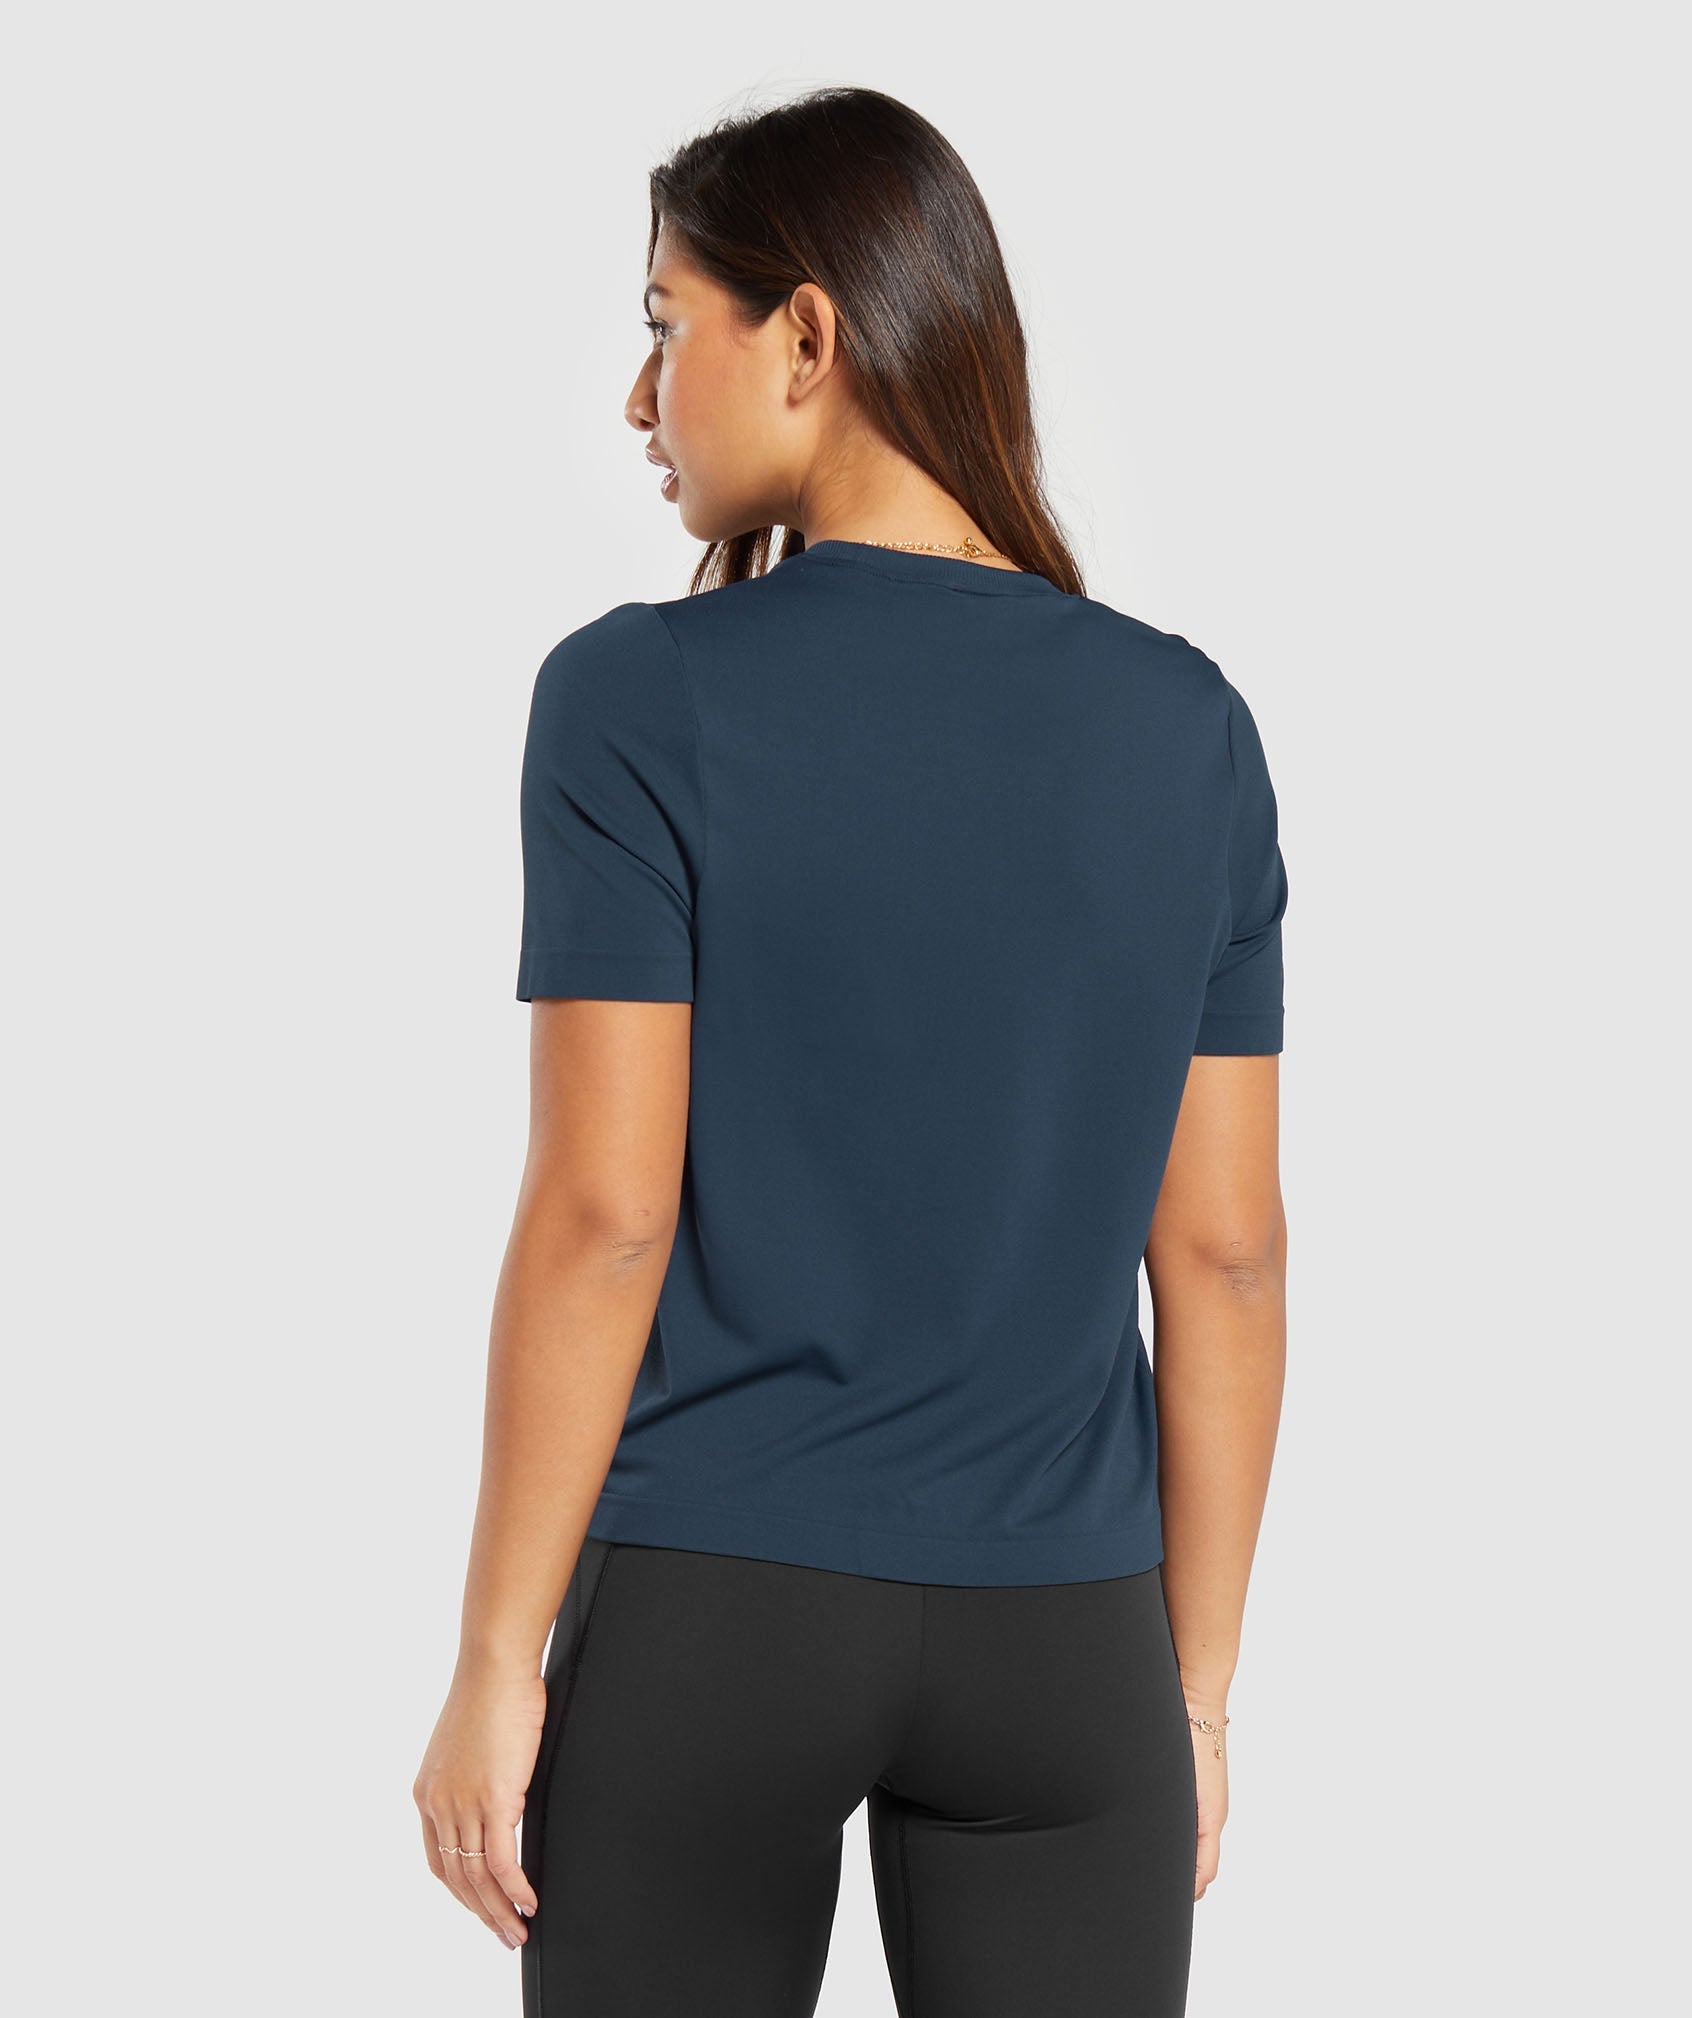 Everyday Seamless T-Shirt in Navy - view 2